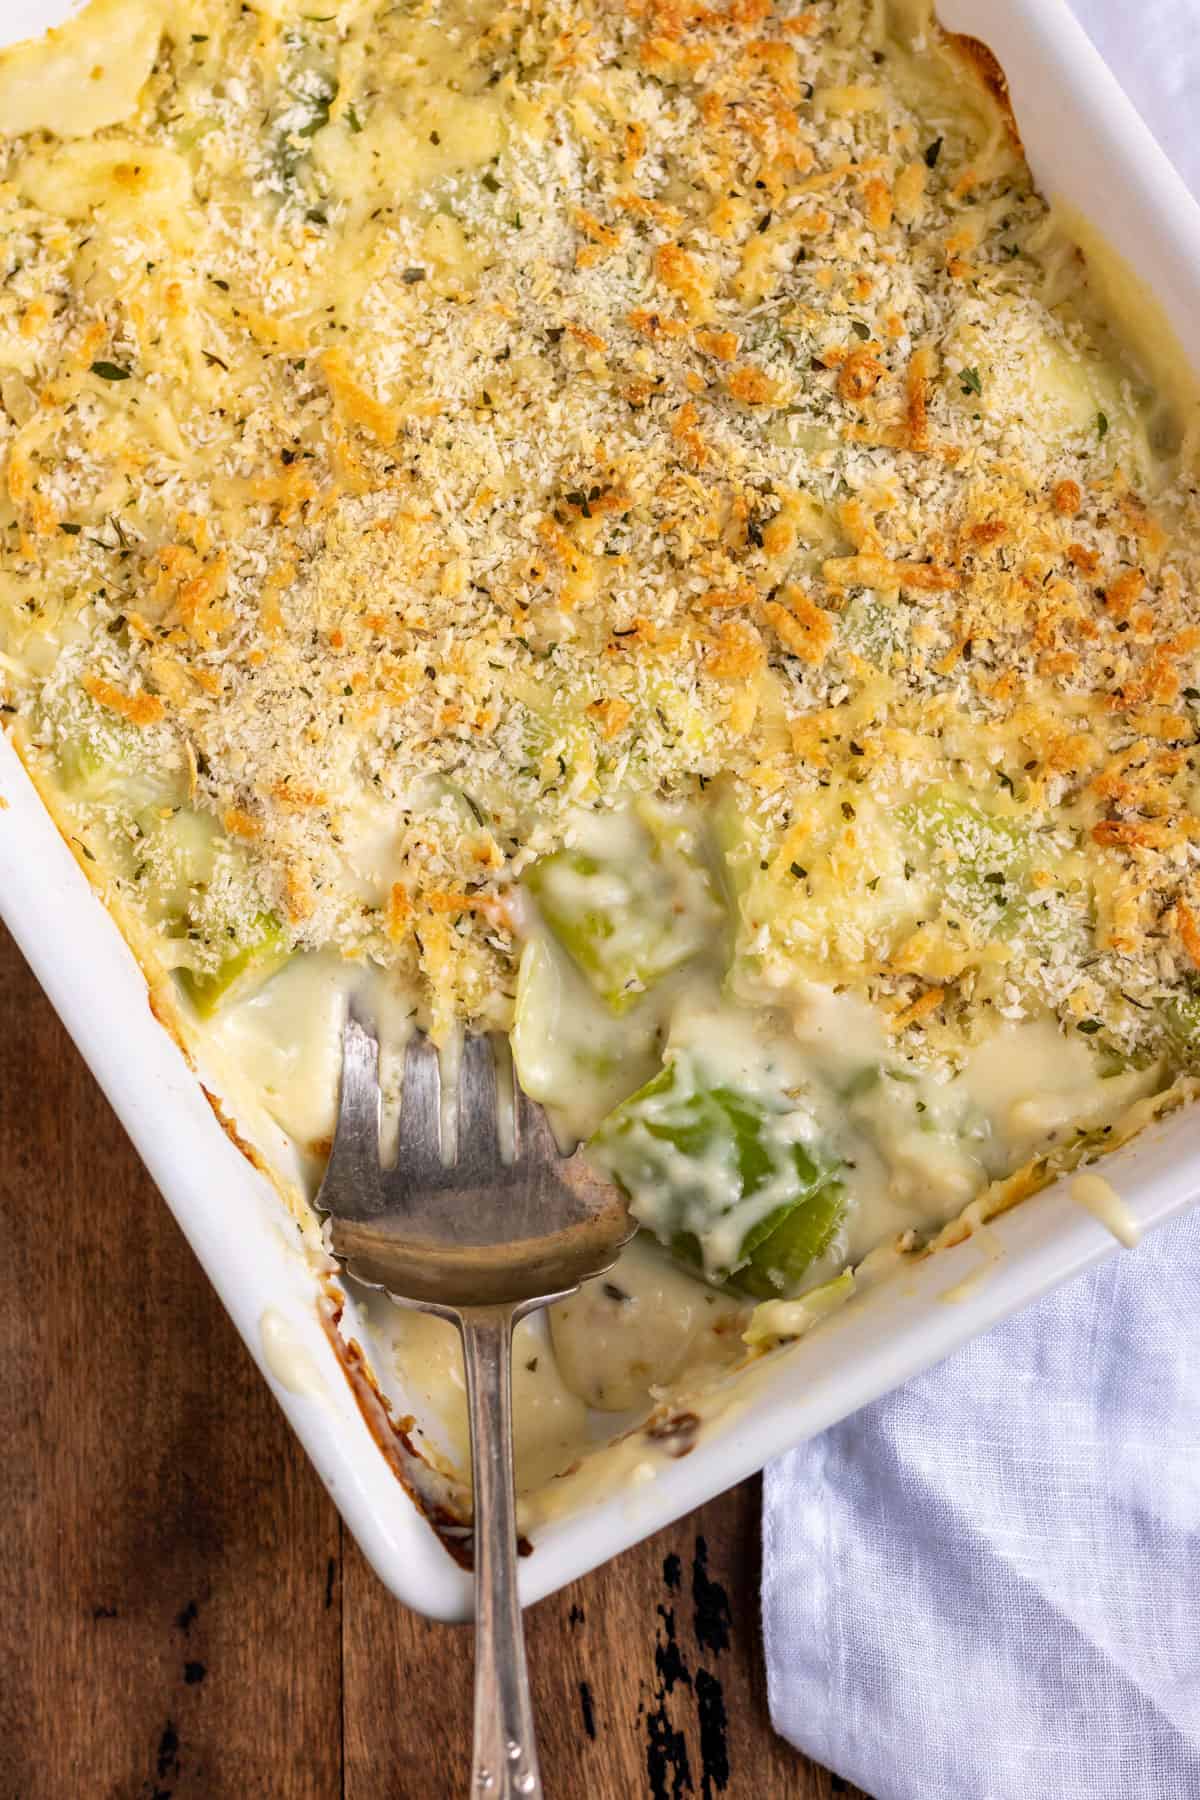 Serving dish of leek gratin, with a portion removed and a serving spoon in it.